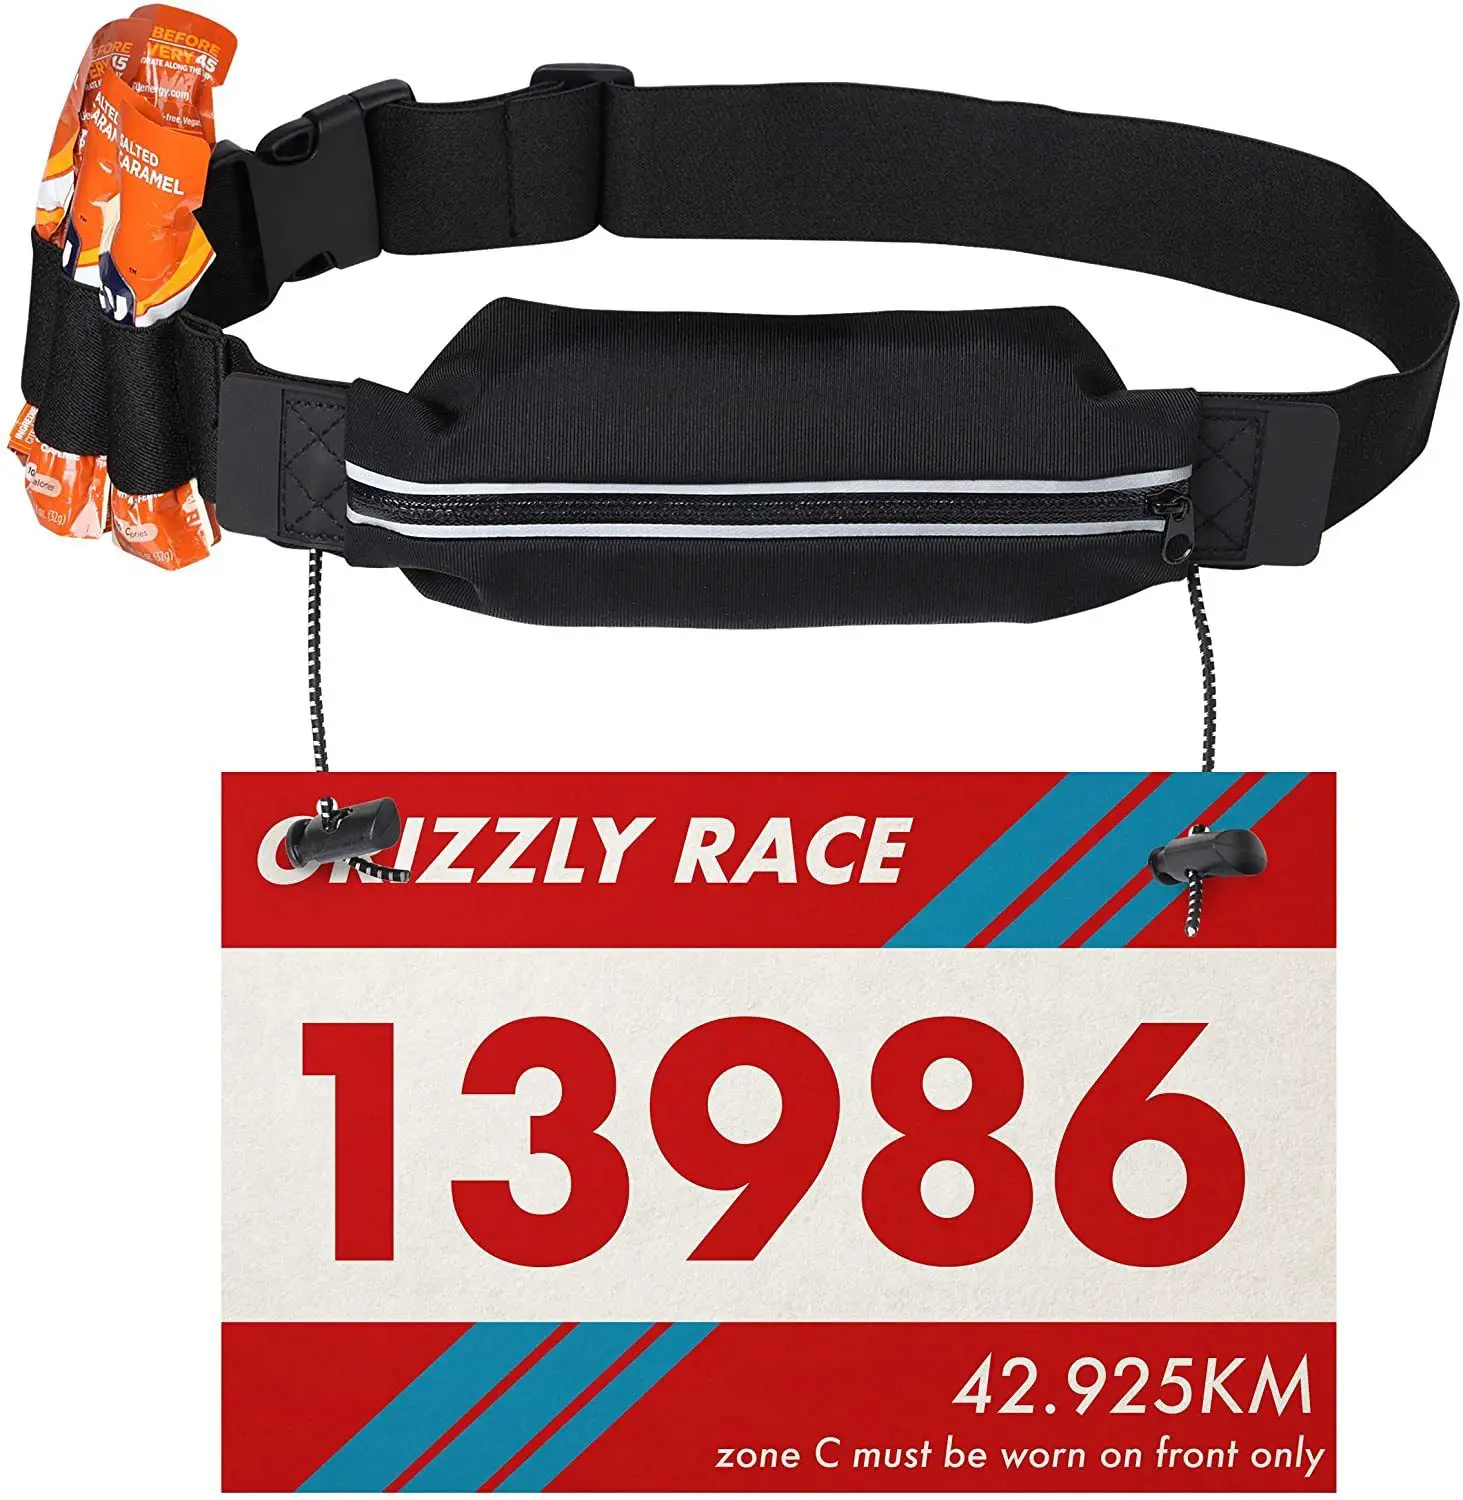 Race Magnets Run Bib Number Clips Holders Running Cycling Ditch The Pins 